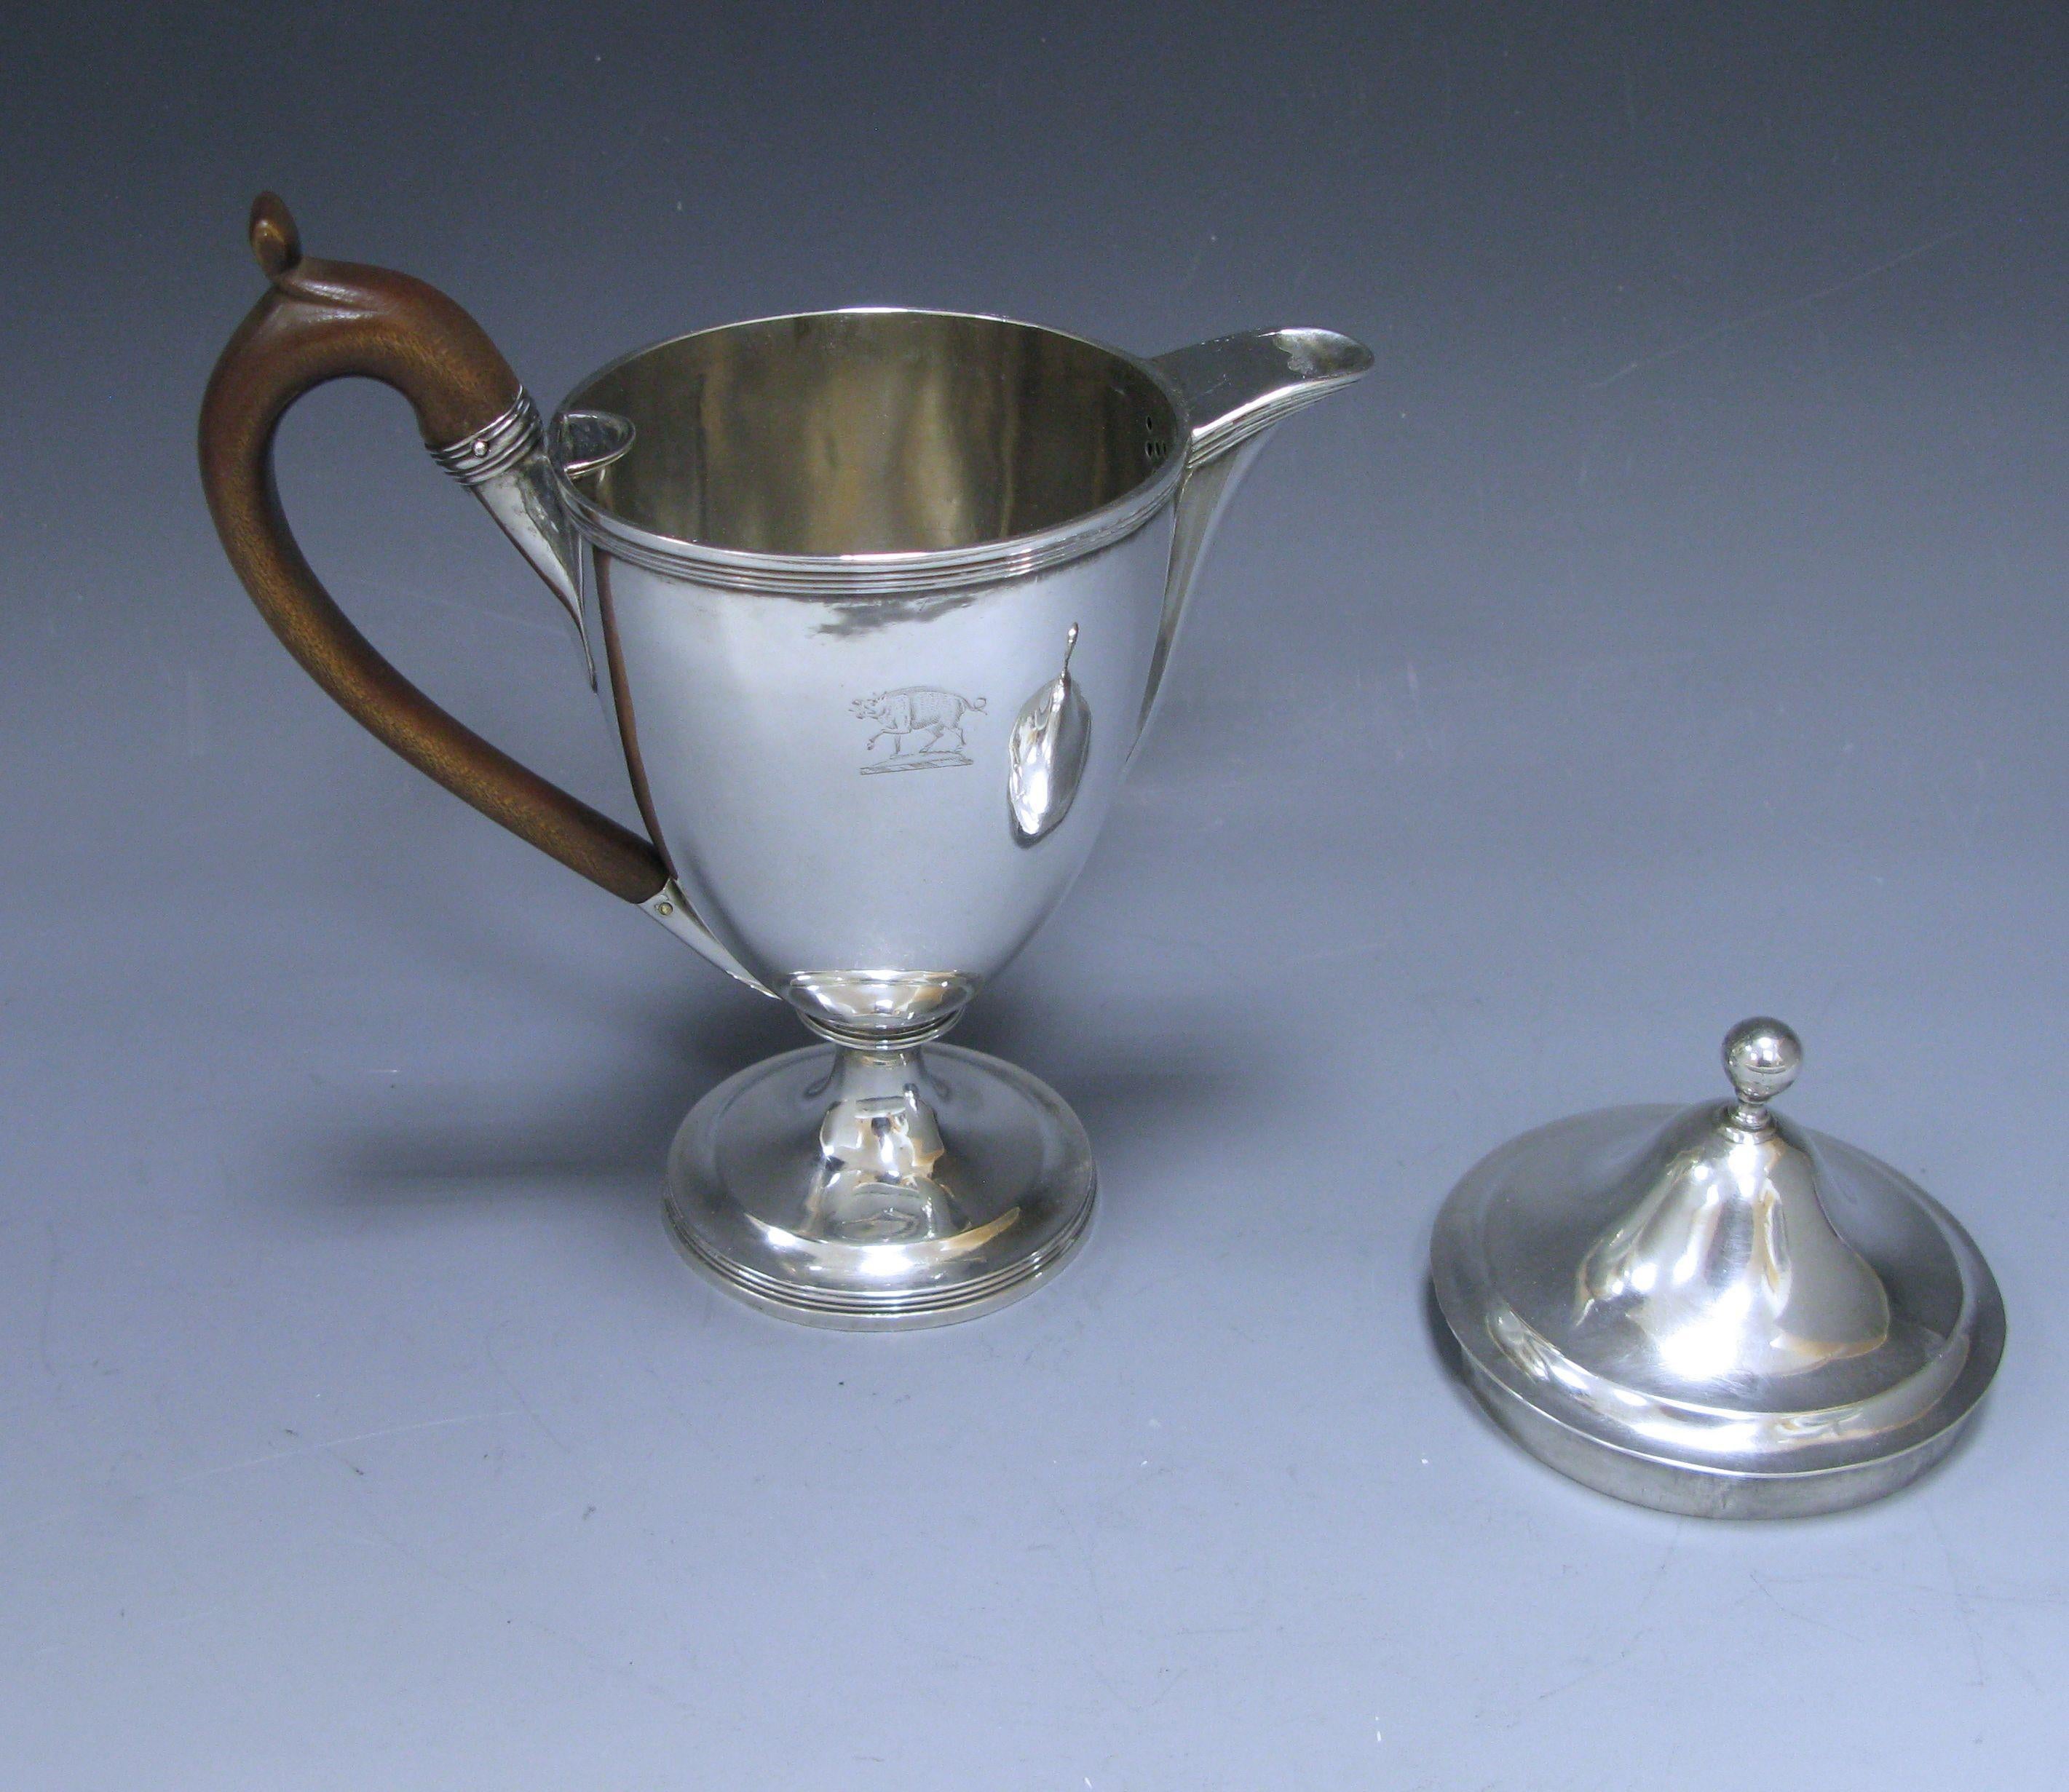 A very elegant George III antique silver argyle, with a vase shaped body which has reed border on the base and top of main body. The pull of lid has a ball finial. The argyle has a fruitwood handle. The body is engraved with the crest of Robert